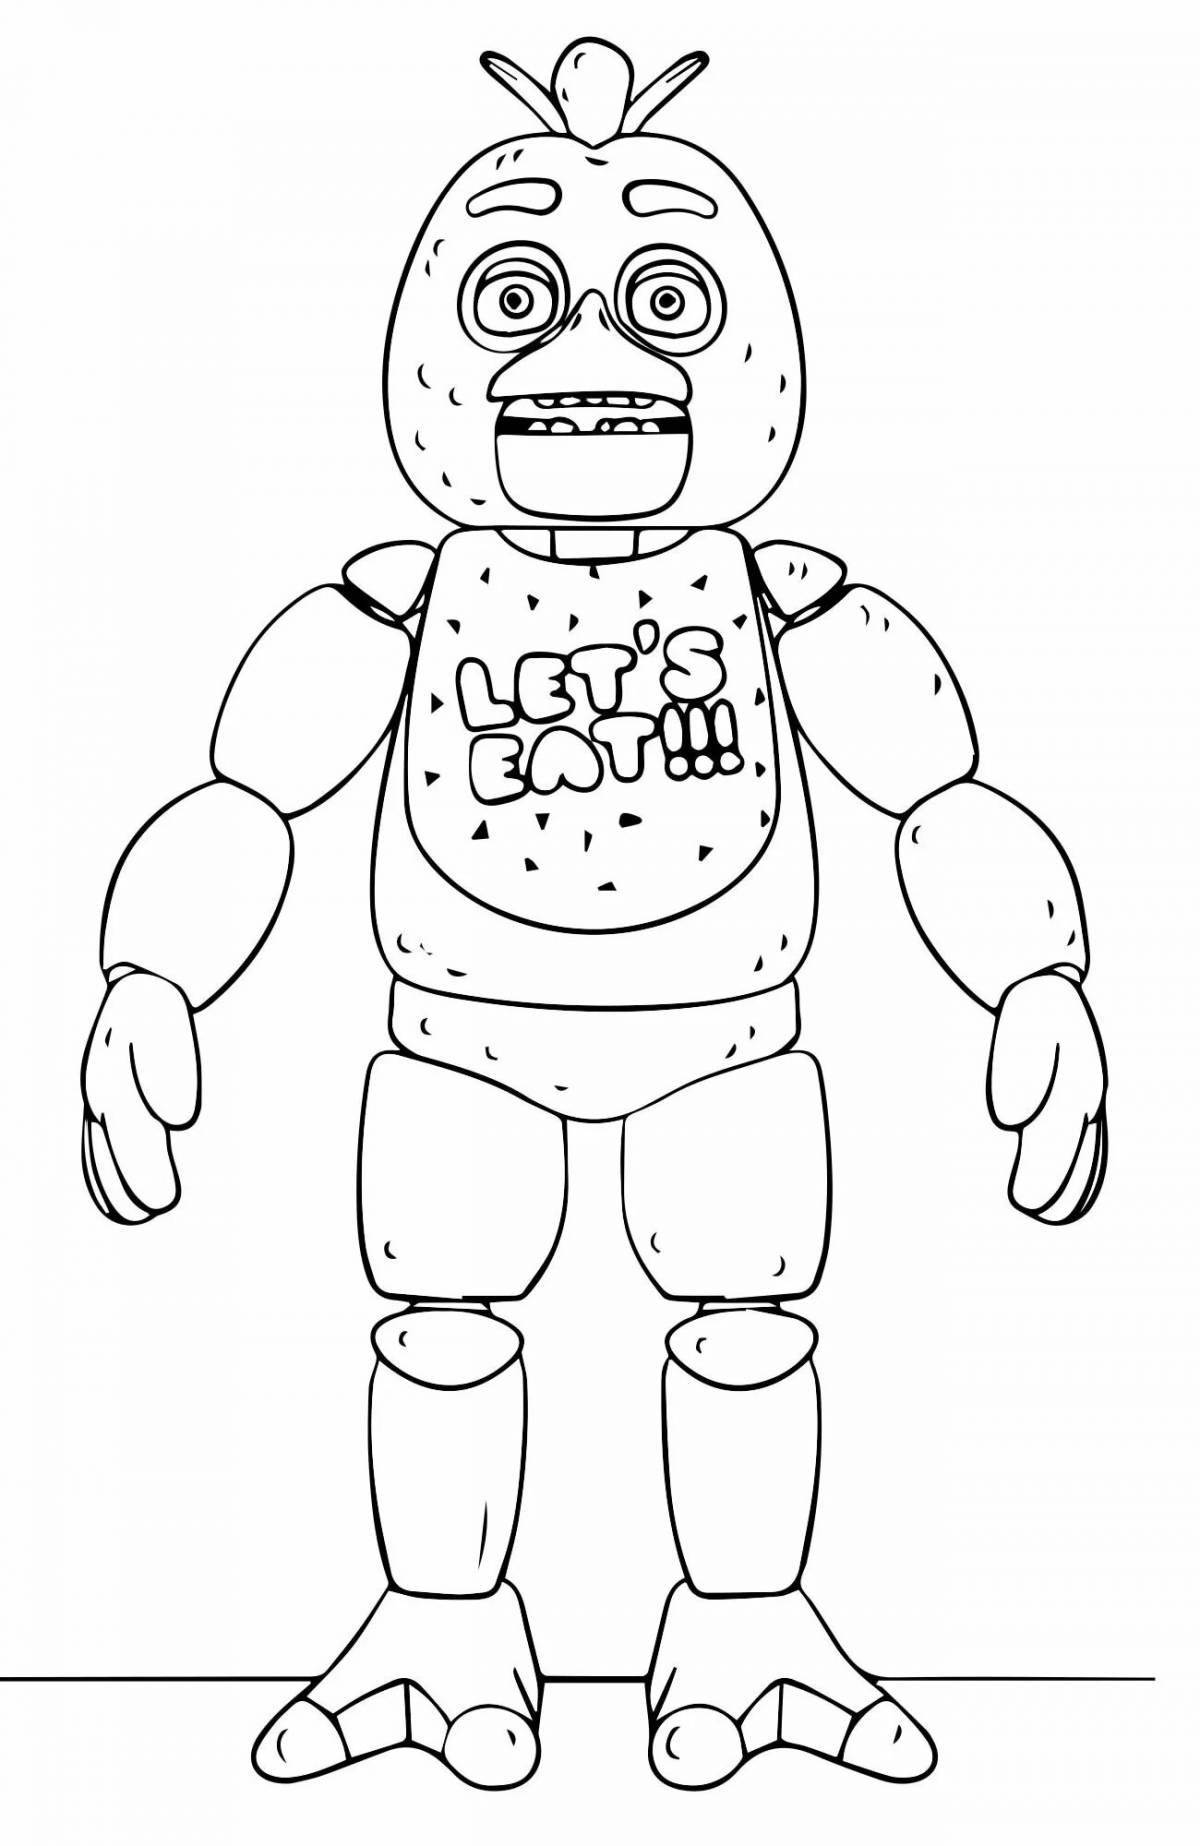 Awesome fnaf coloring pages for kids